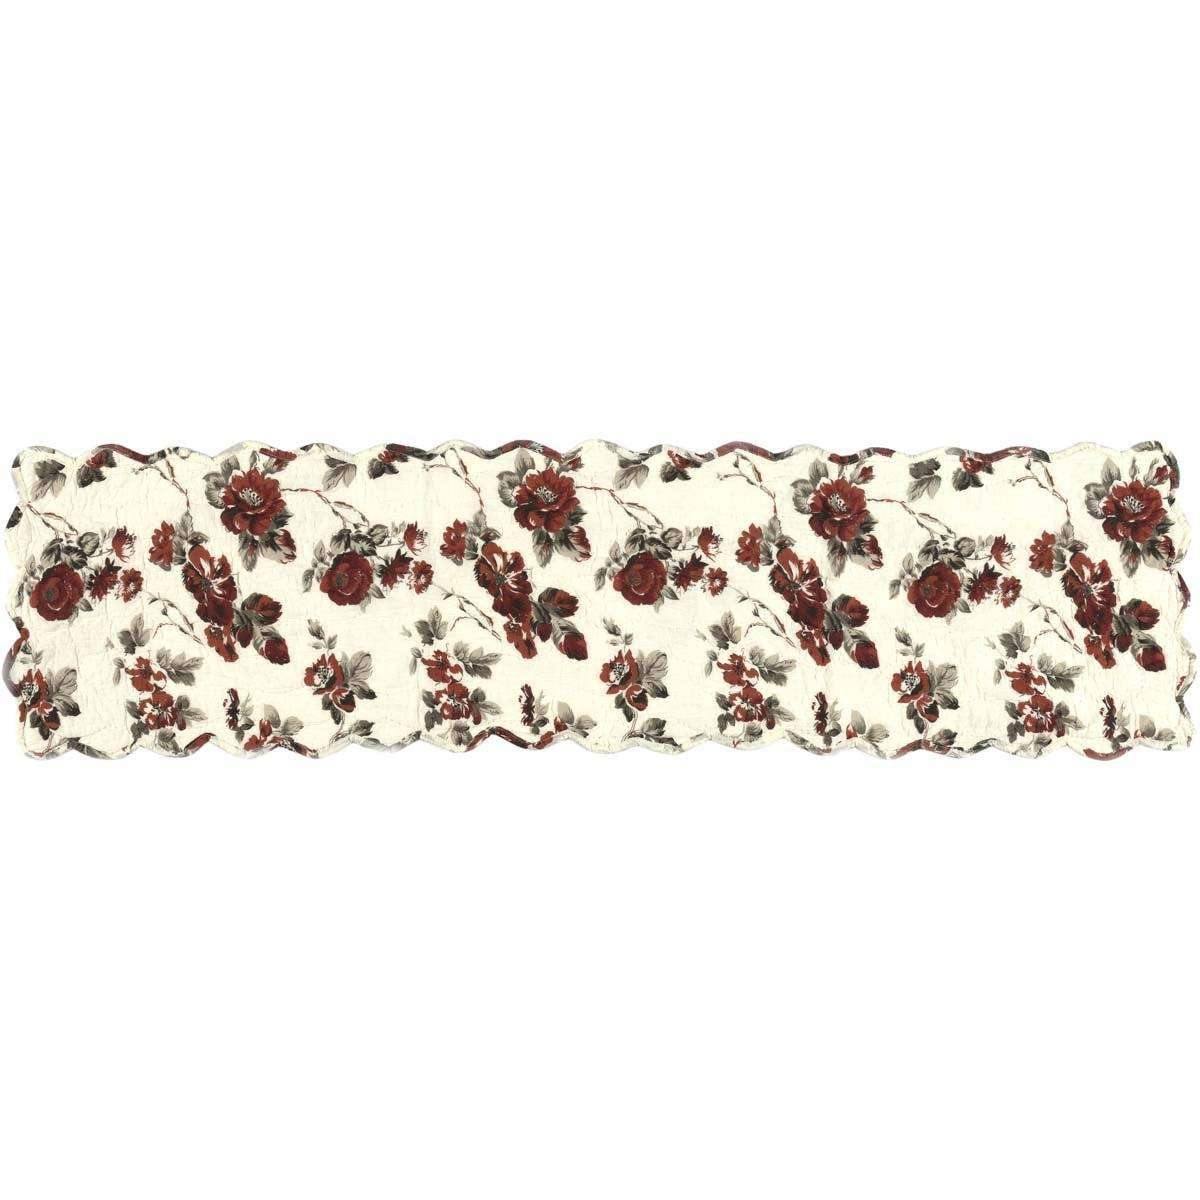 Mariell Quilted Runner 13x48 VHC Brands - The Fox Decor